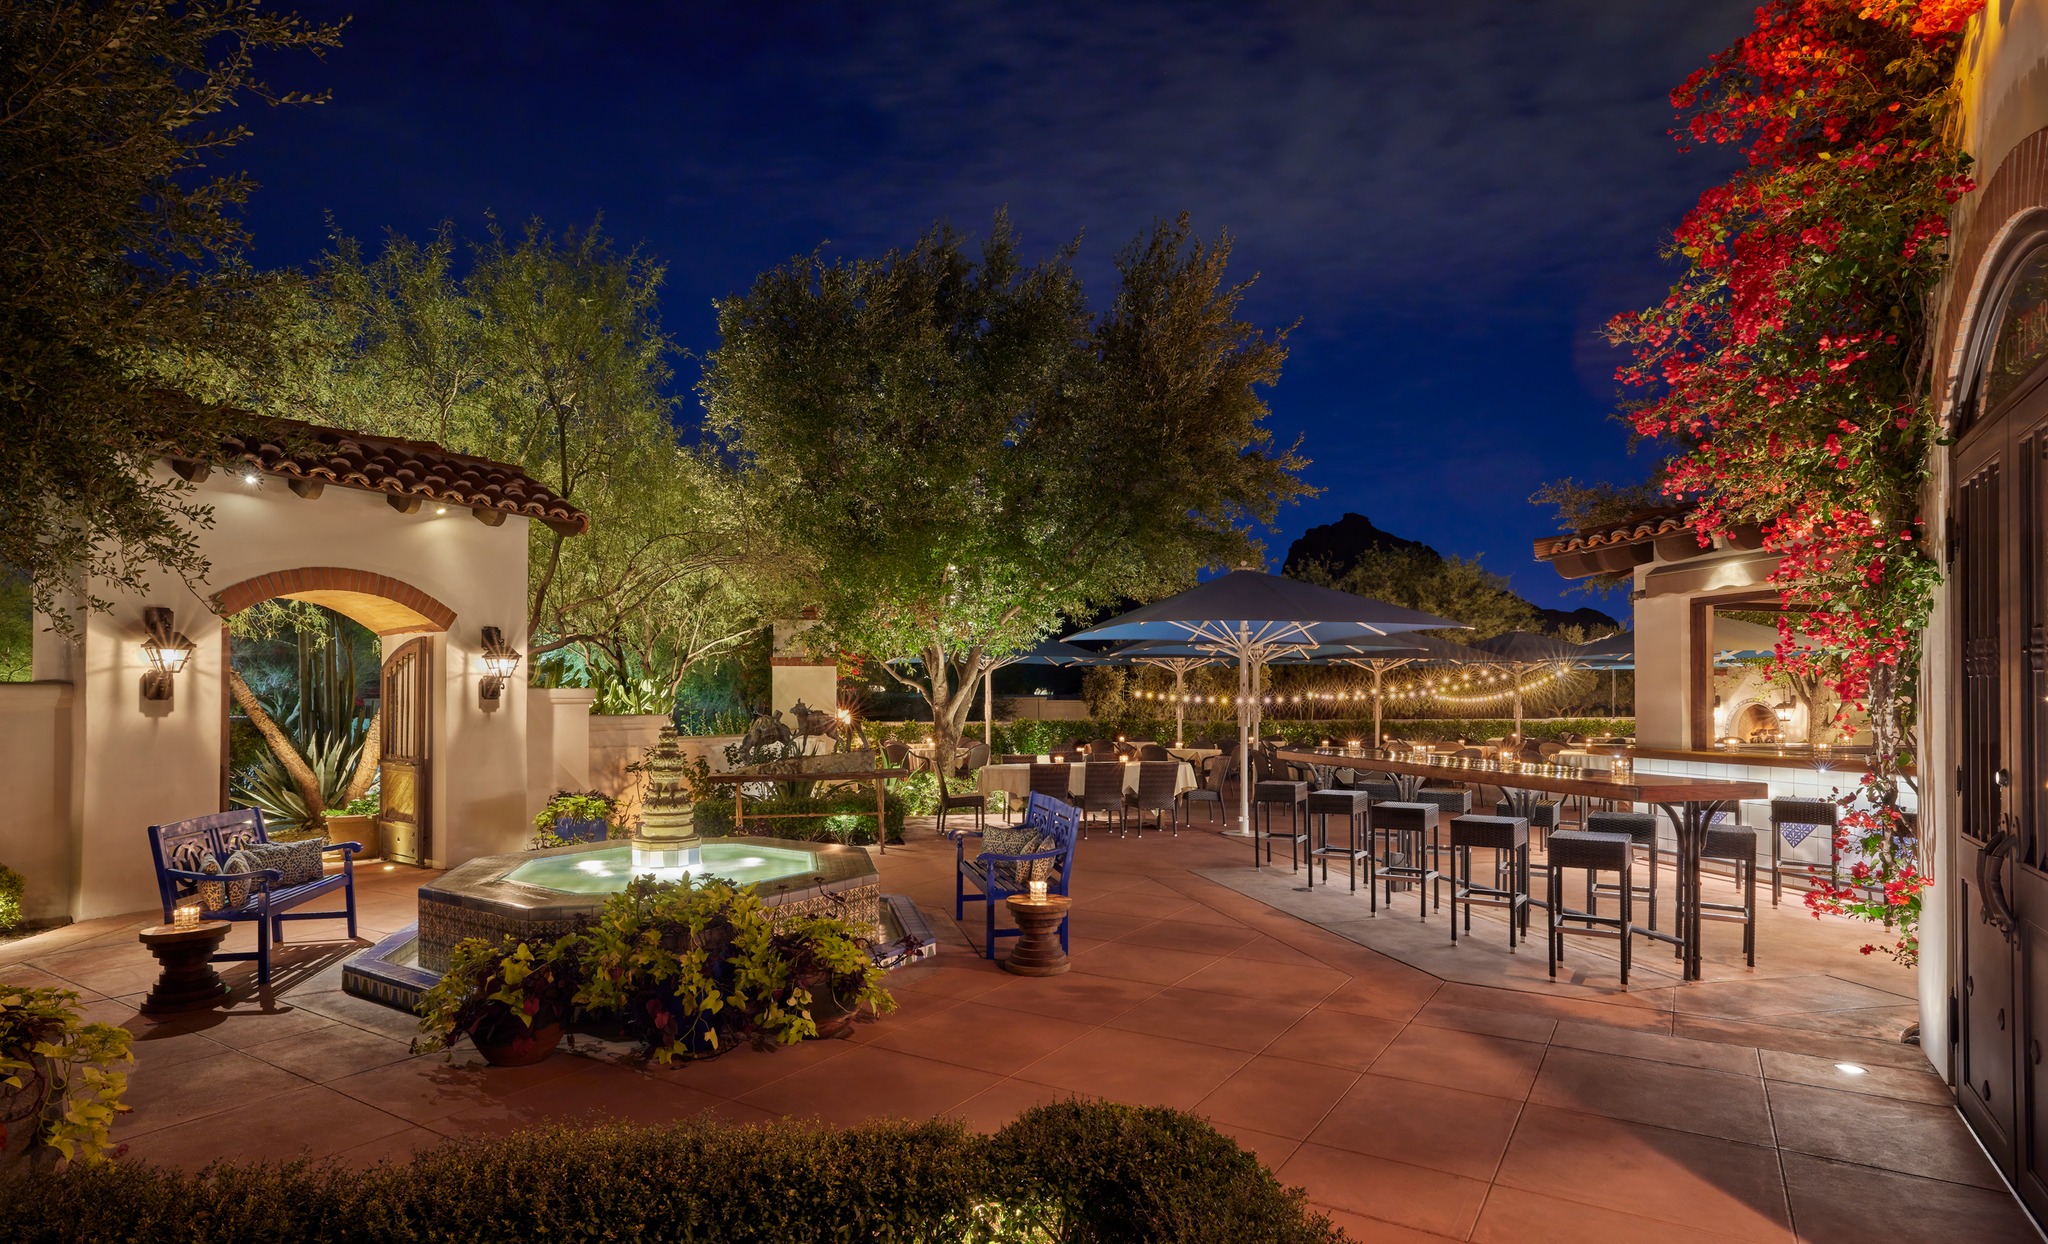 An evening shot of the patio at El Chorro with a water feature and tables.